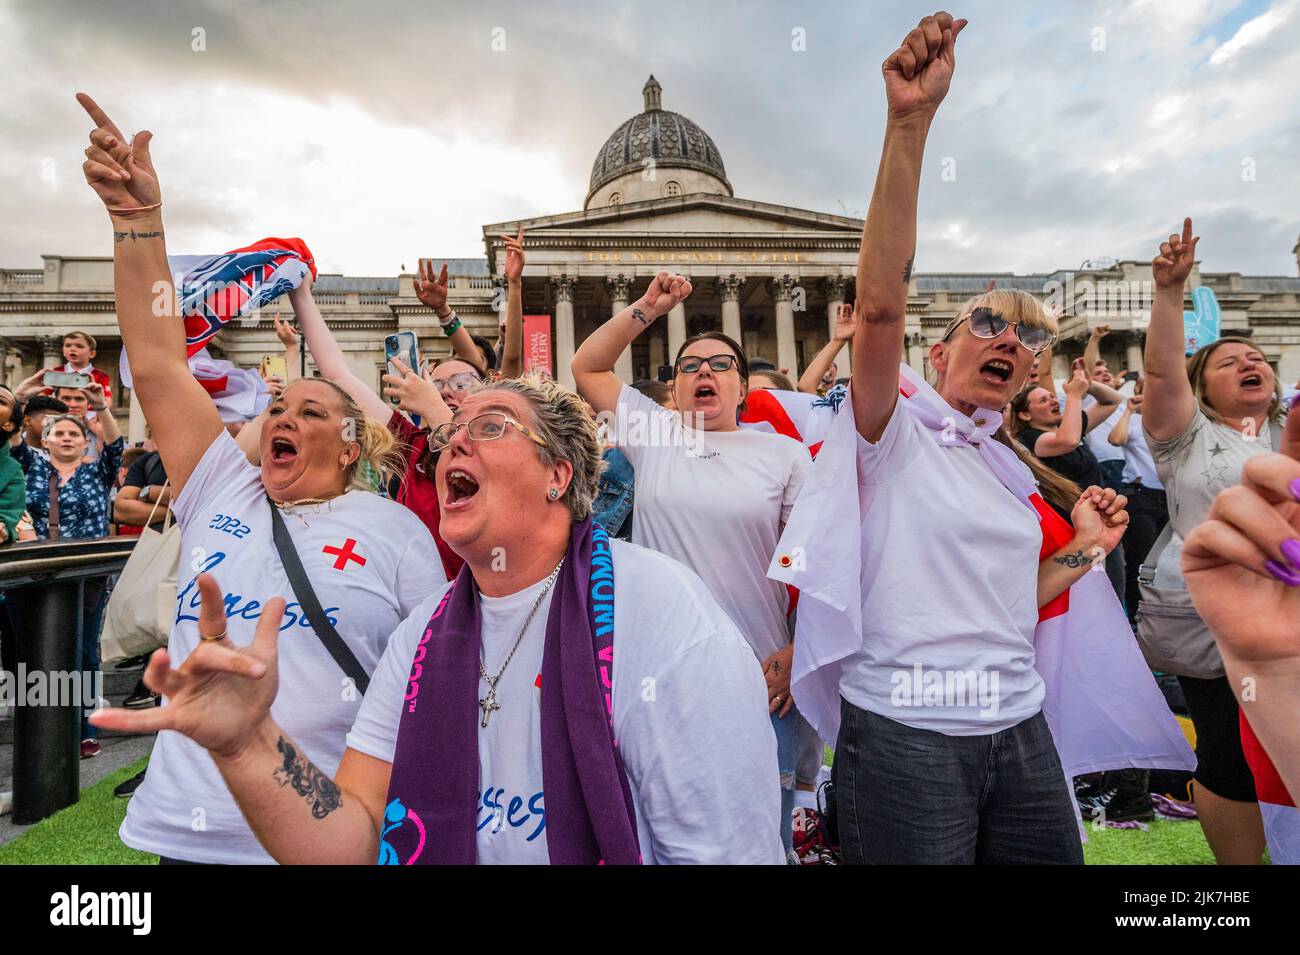 London, UK. 31st July, 2022. Singing sweet Caroline at the final whistle England win 2-1 - England v Germany UEFA Women's EURO 2022 final match fanzone in Trafalgar Square. Organised by the Mayor of London Sadiq Khan, and tournament organisers. It offered free access for up to 7,000 supporters. Credit: Guy Bell/Alamy Live News Stock Photo